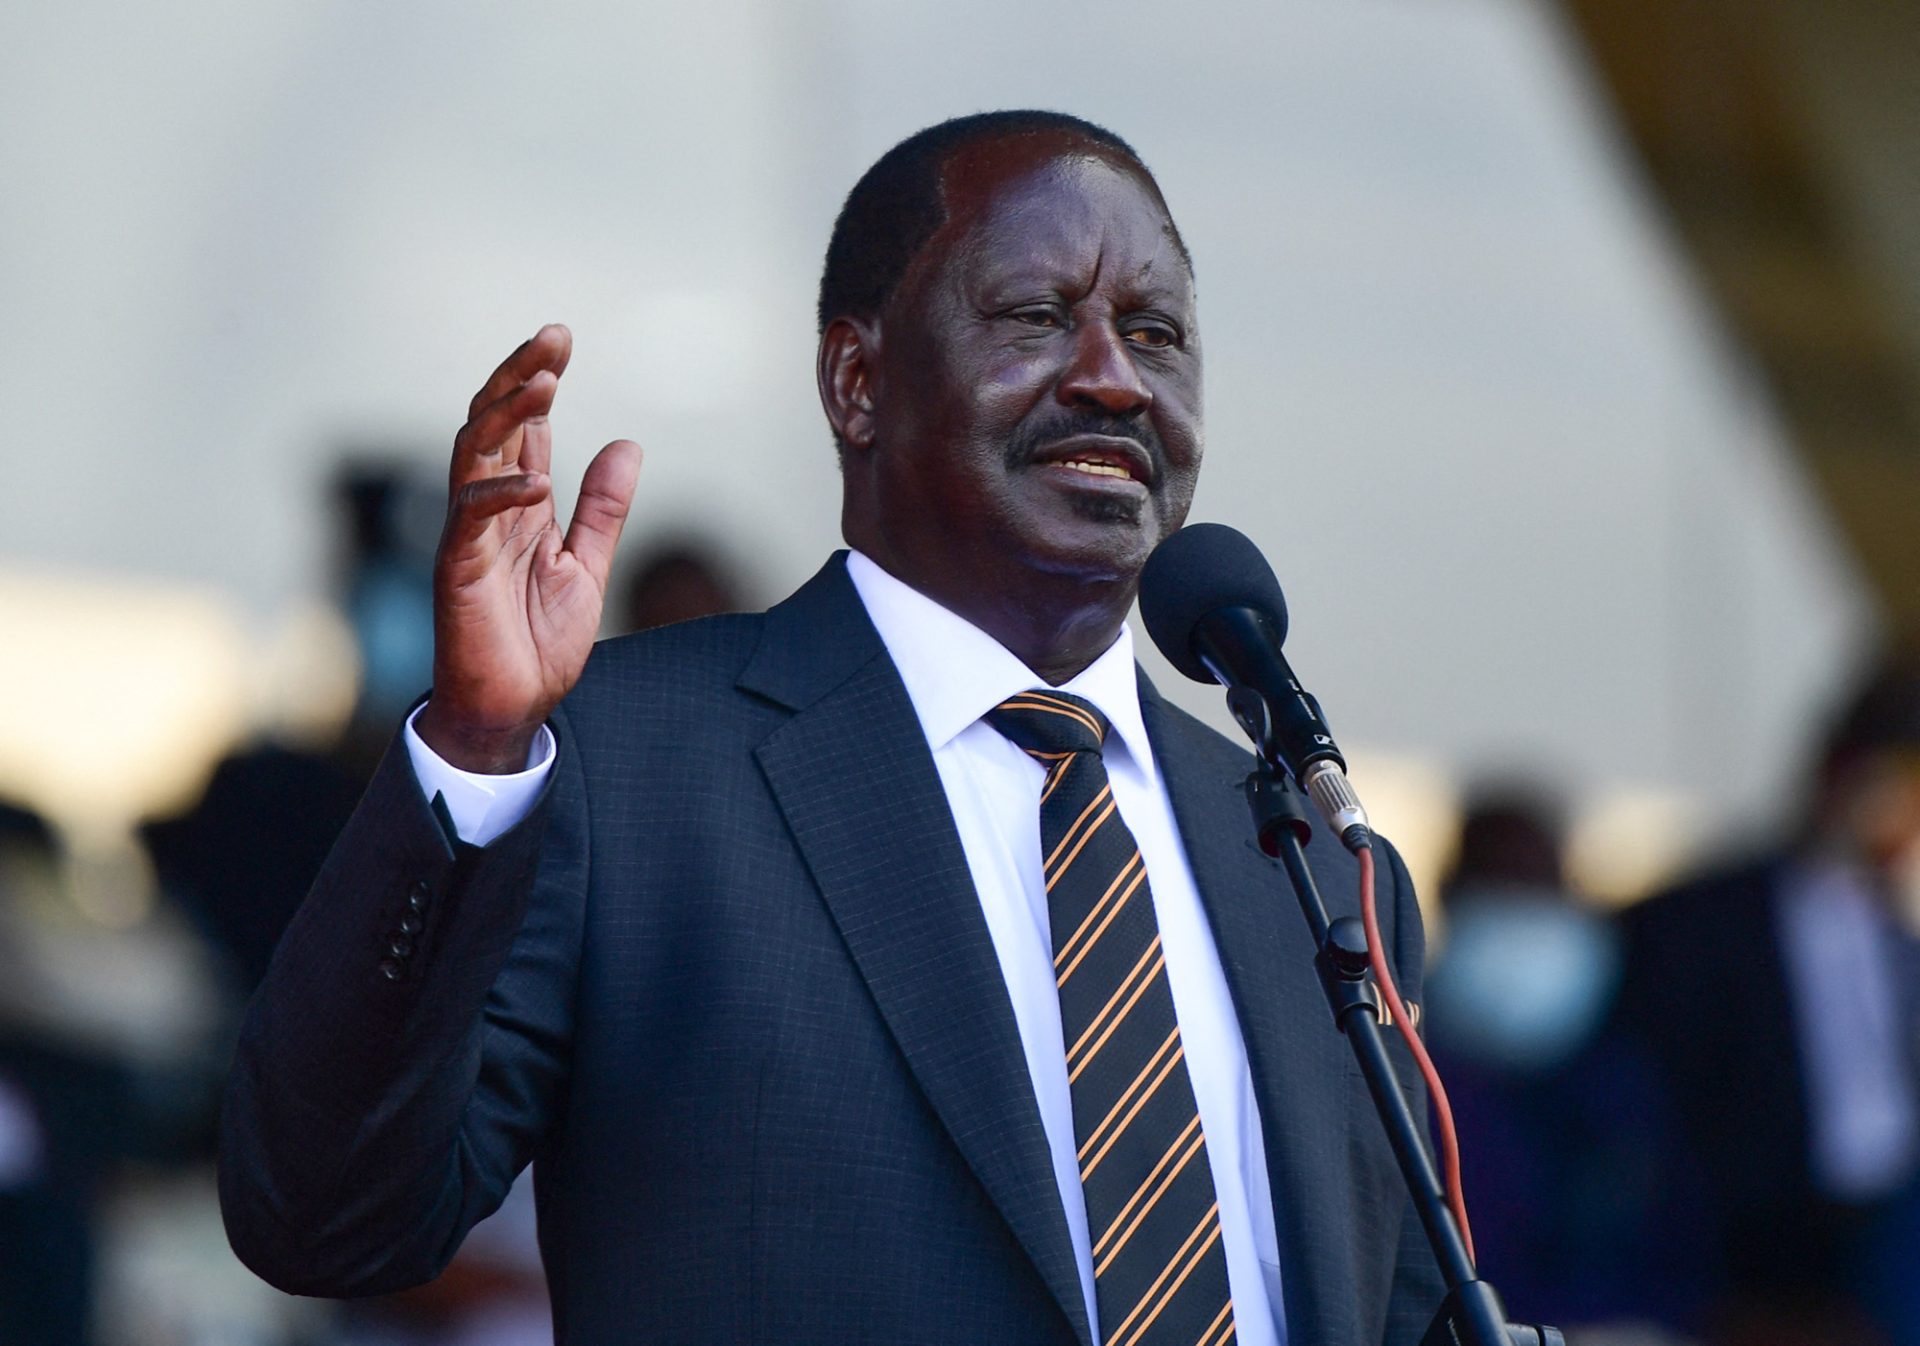 Raila’s conflict with US and Western nations